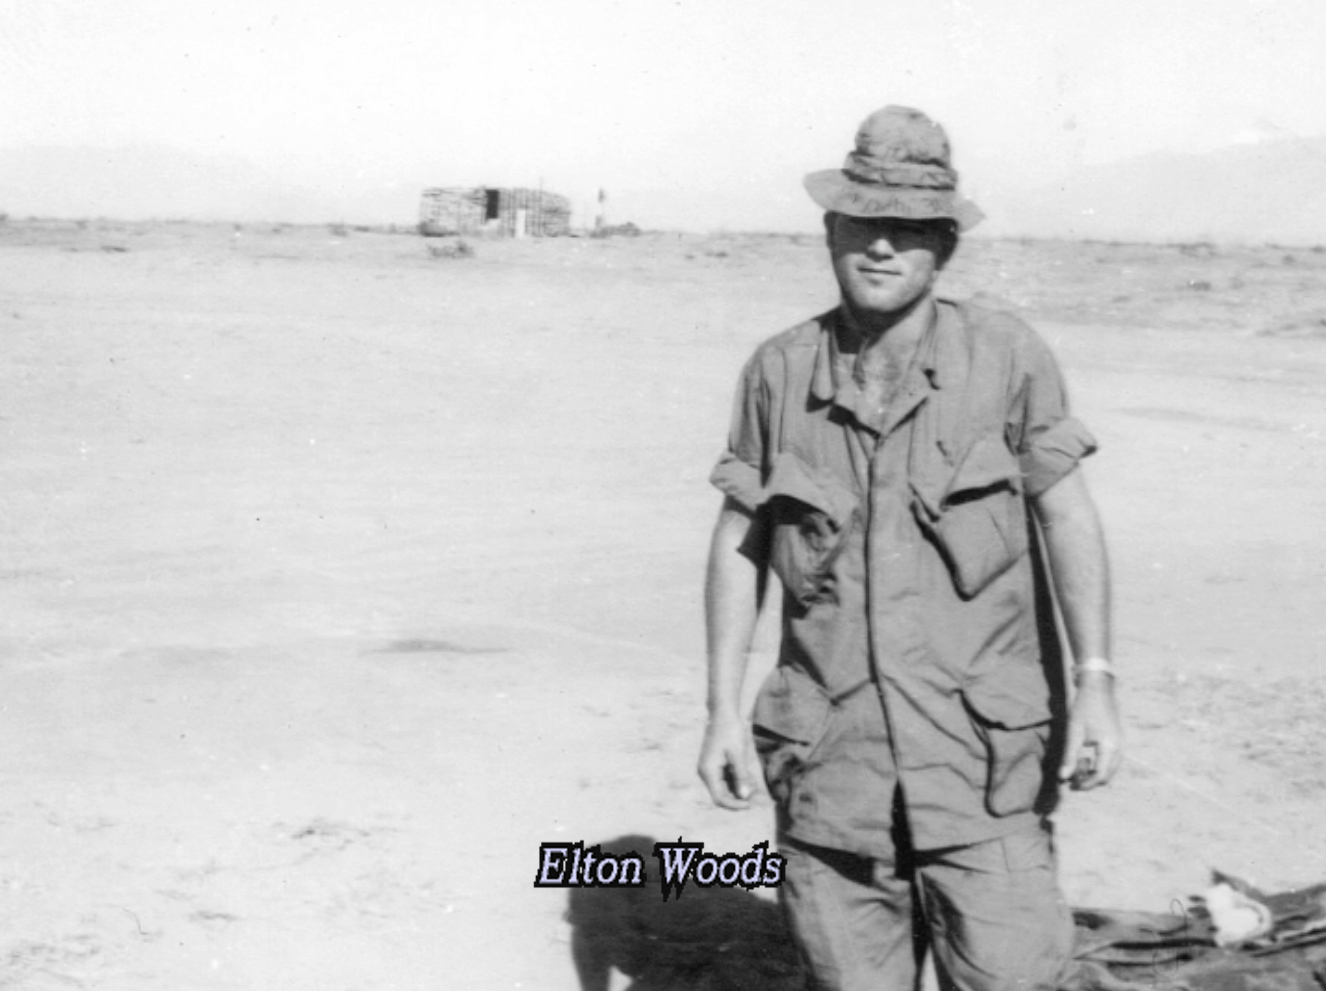 Photo of a soldier in uniform and a boonie hat, standing in a desolate landscape. Text on photo says "Elton Woods."